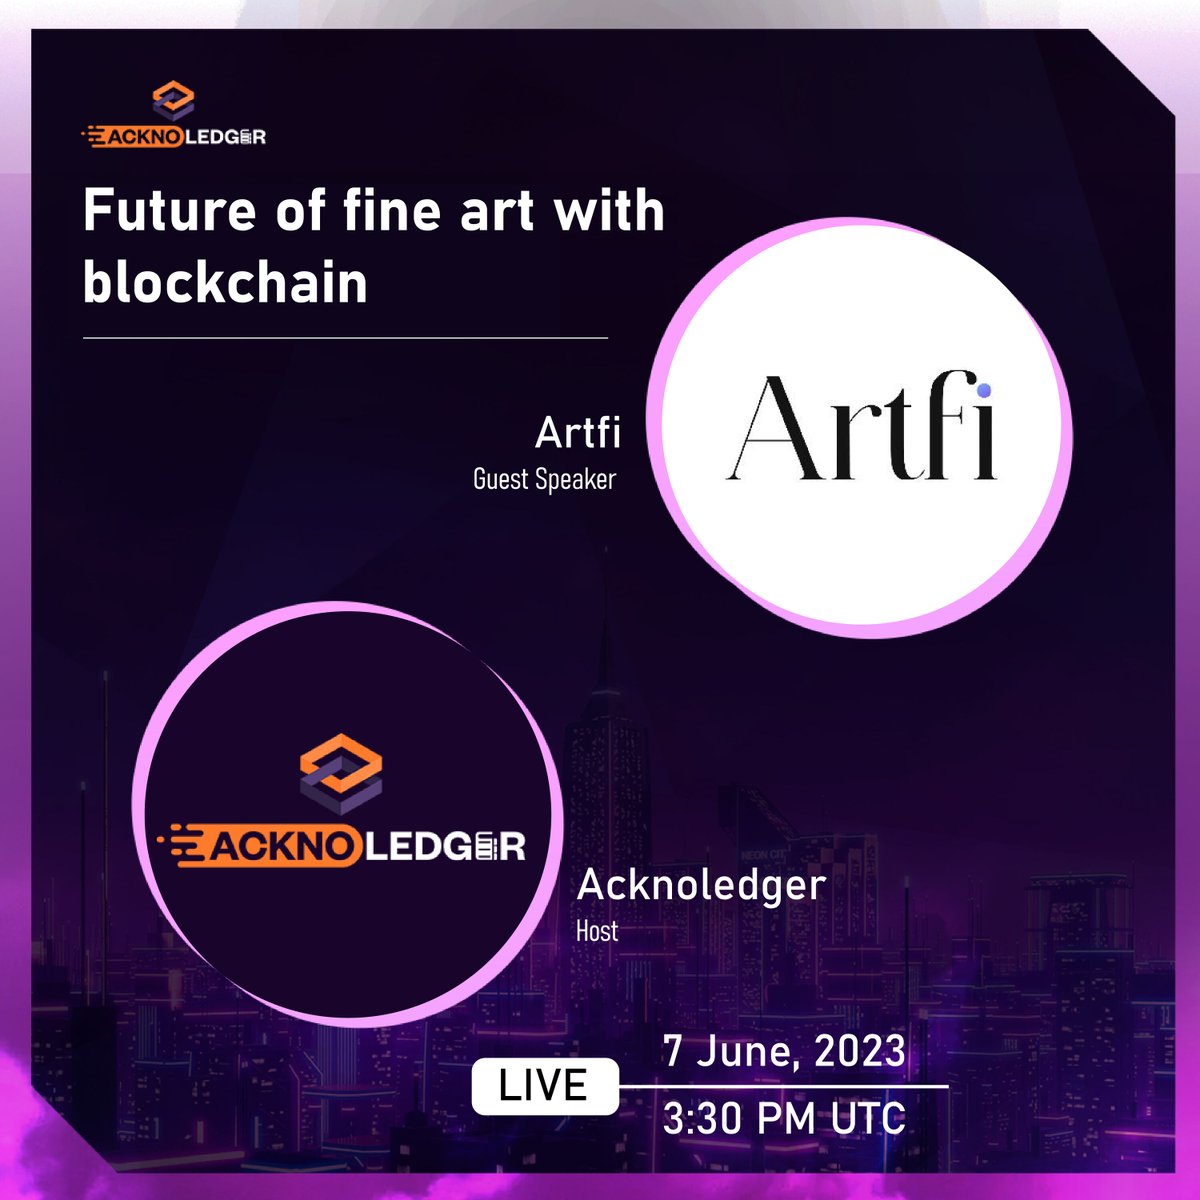 🔮 Join us for an artistic journey into the Future of Fine Art with #Blockchain! Excited to have @artfiglobal leading the discussion on the transformative power of blockchain in the art world. 🌐🖼️ Don't miss this #livesession today at 3.30pm UTC🚀

#Metaverse #GatewayToMetaverse